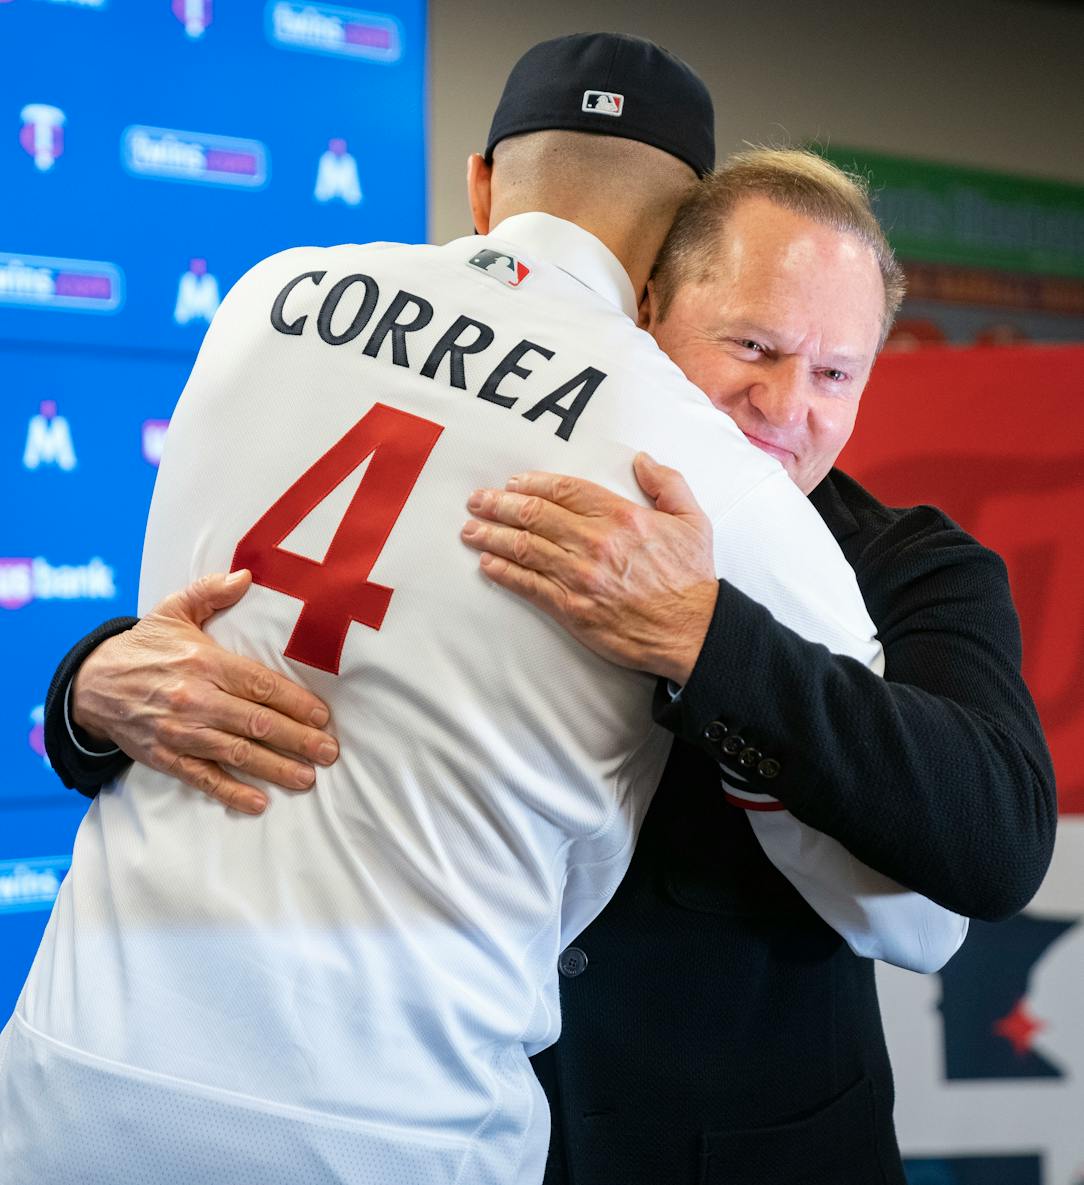 Persistence led Twins back to Correa: 'His heart was here